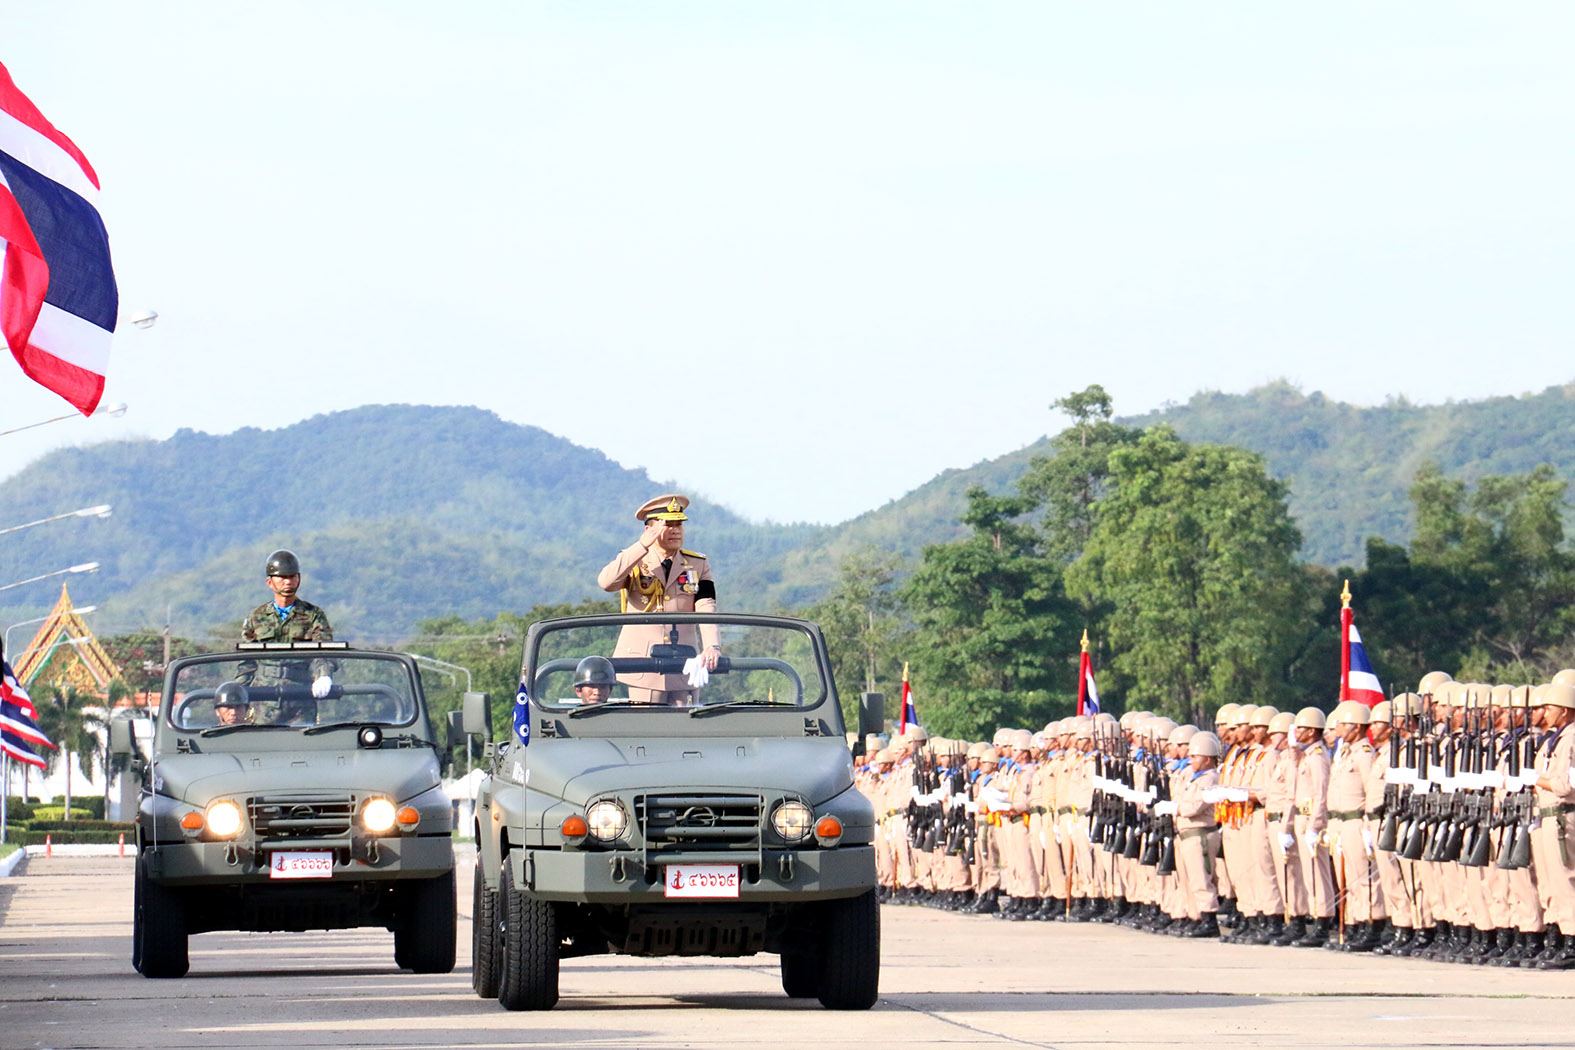 Adm. Na Areenij, commander-in-chief of the Royal Thai Navy, presided over Thai Armed Forces Day at Sattahip Naval Base.